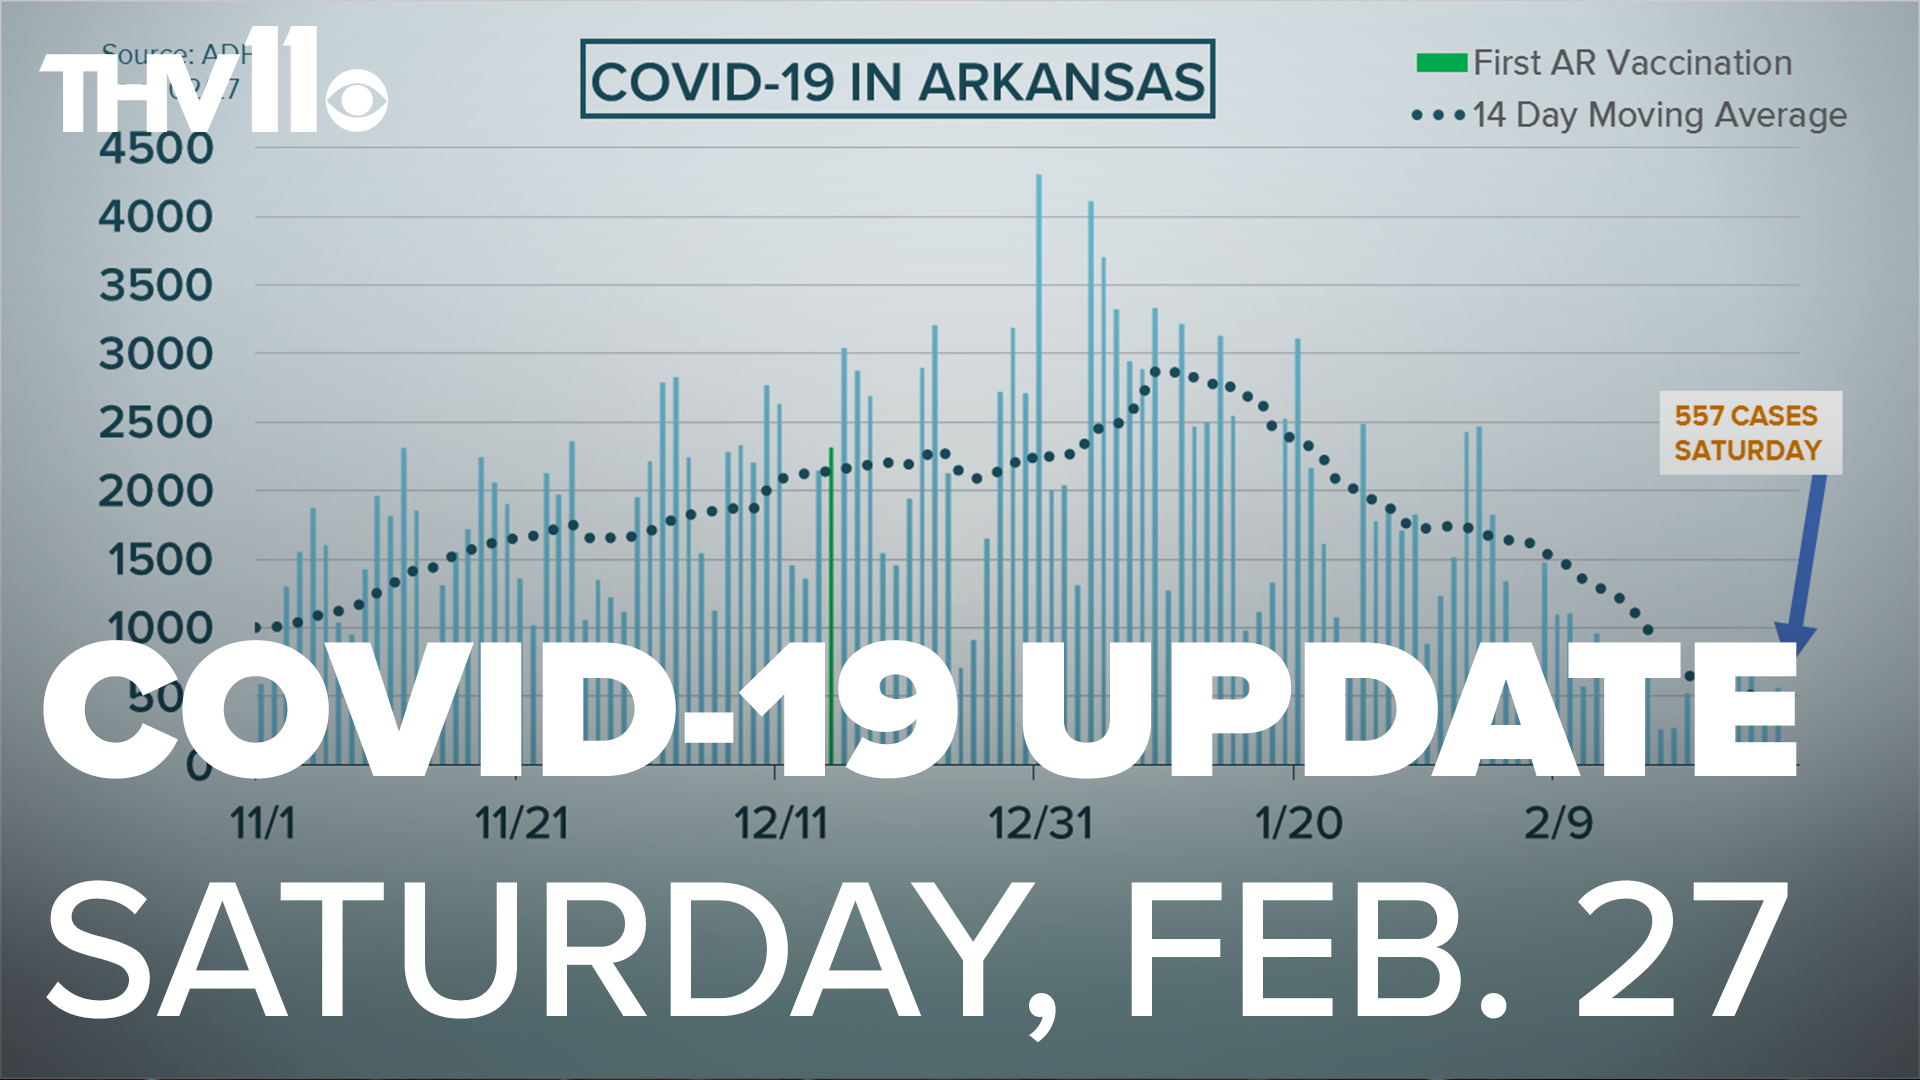 Melissa Zygowicz provides an update on the coronavirus in Arkansas for Saturday, February 27.